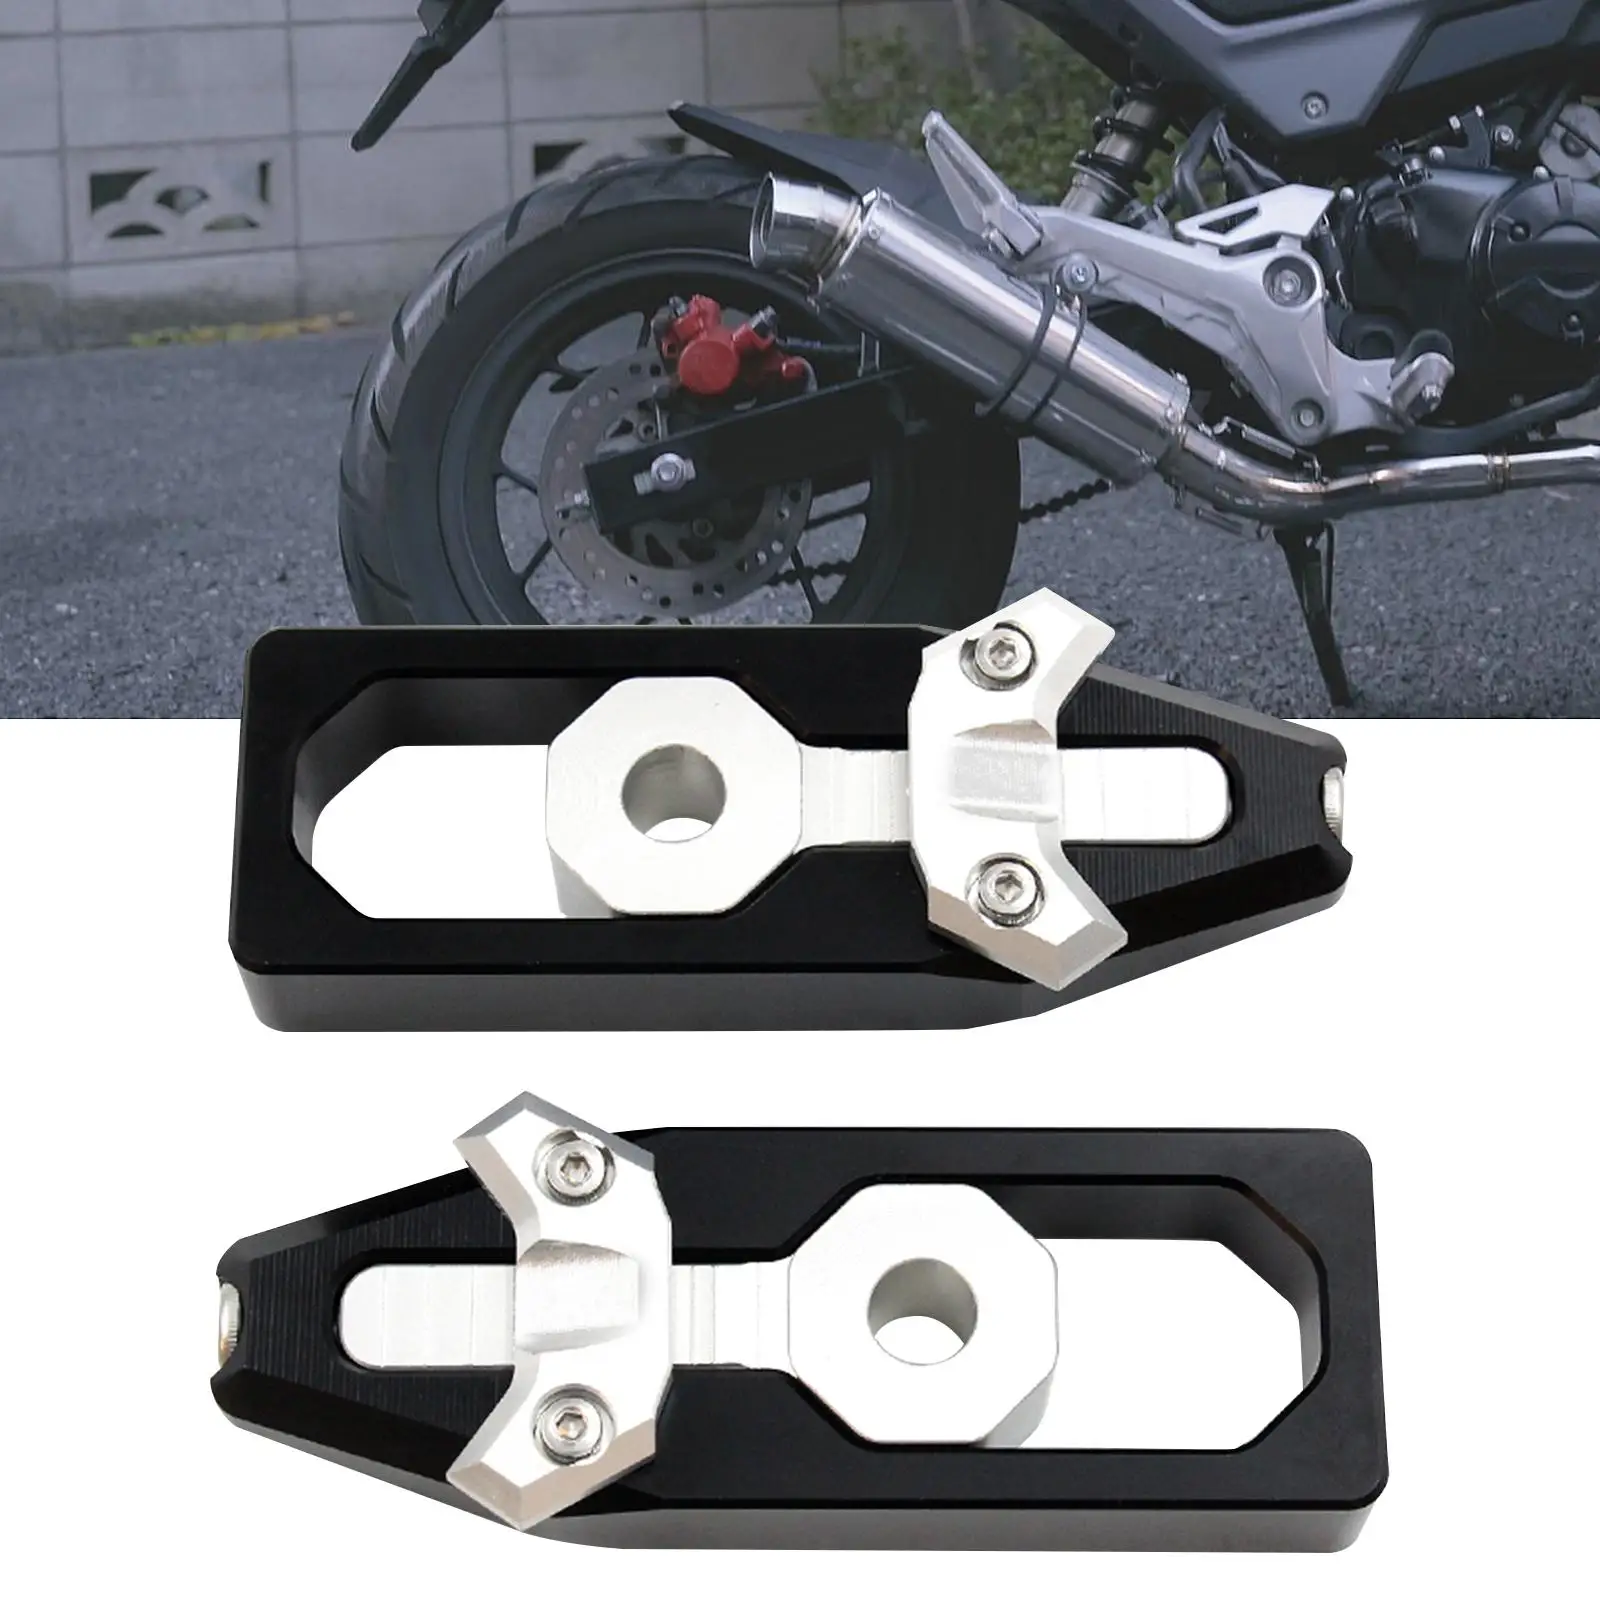 2 Pieces Motorcycle Chain Adjuster Set Motorcycle Chain Adjusting Tool